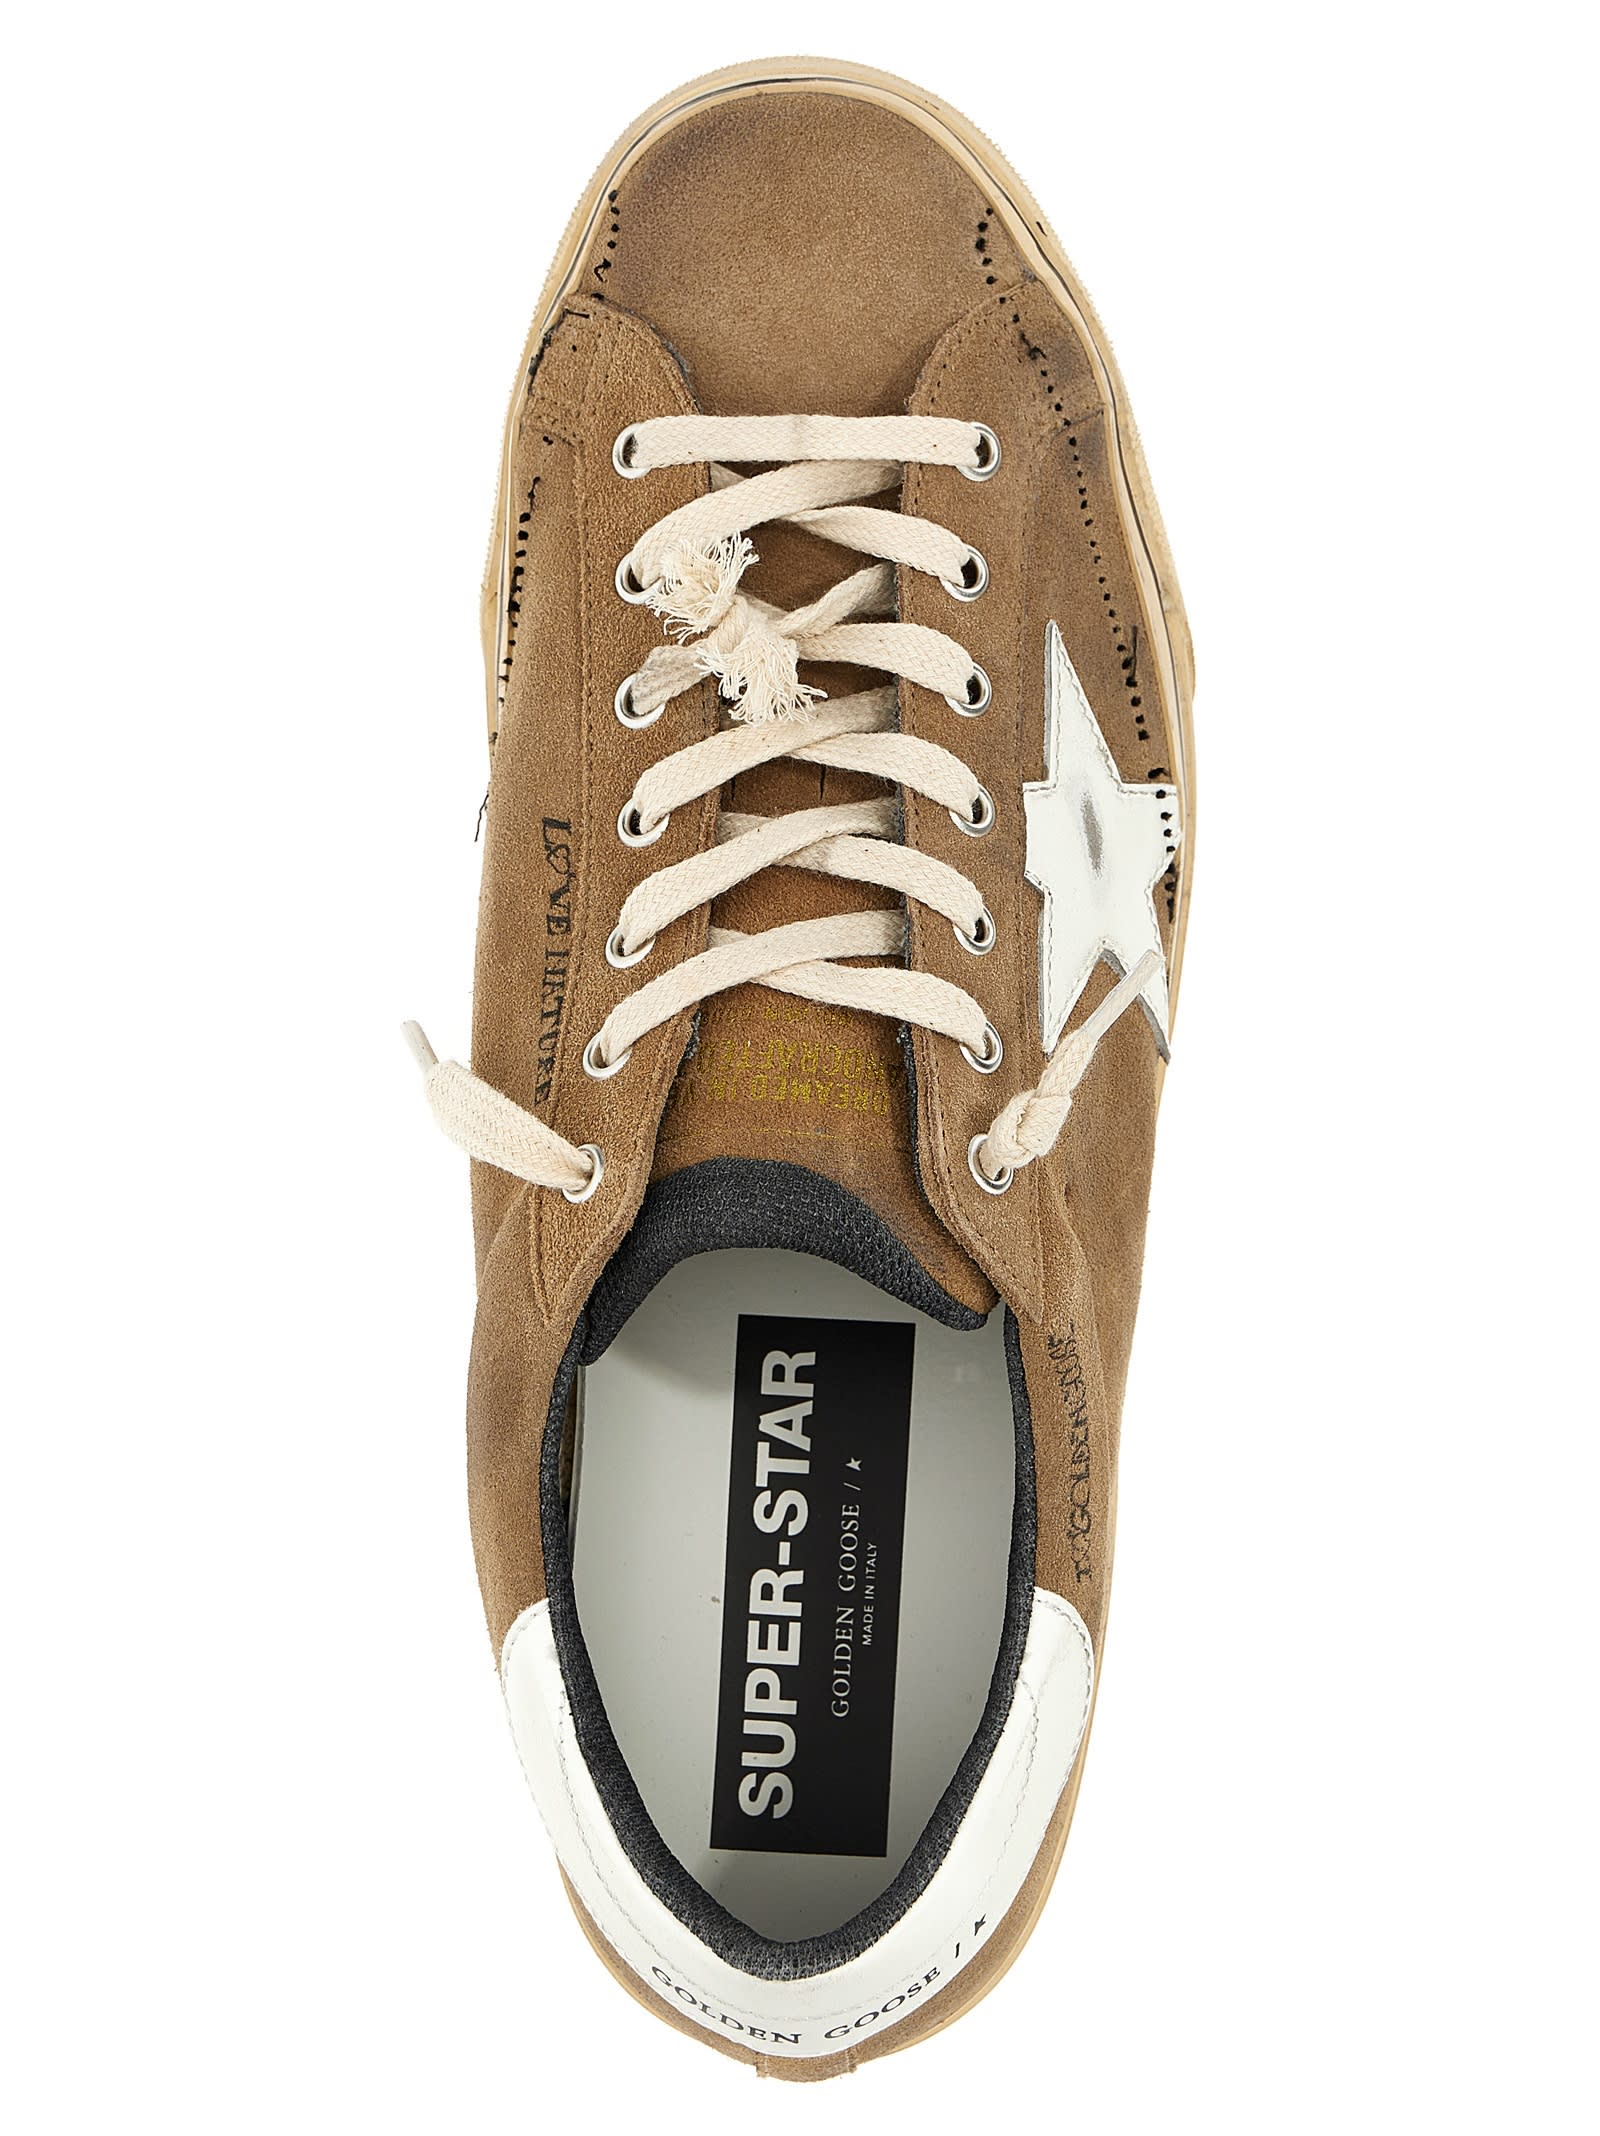 Shop Golden Goose Superstar Sneakers In Tabacco/white